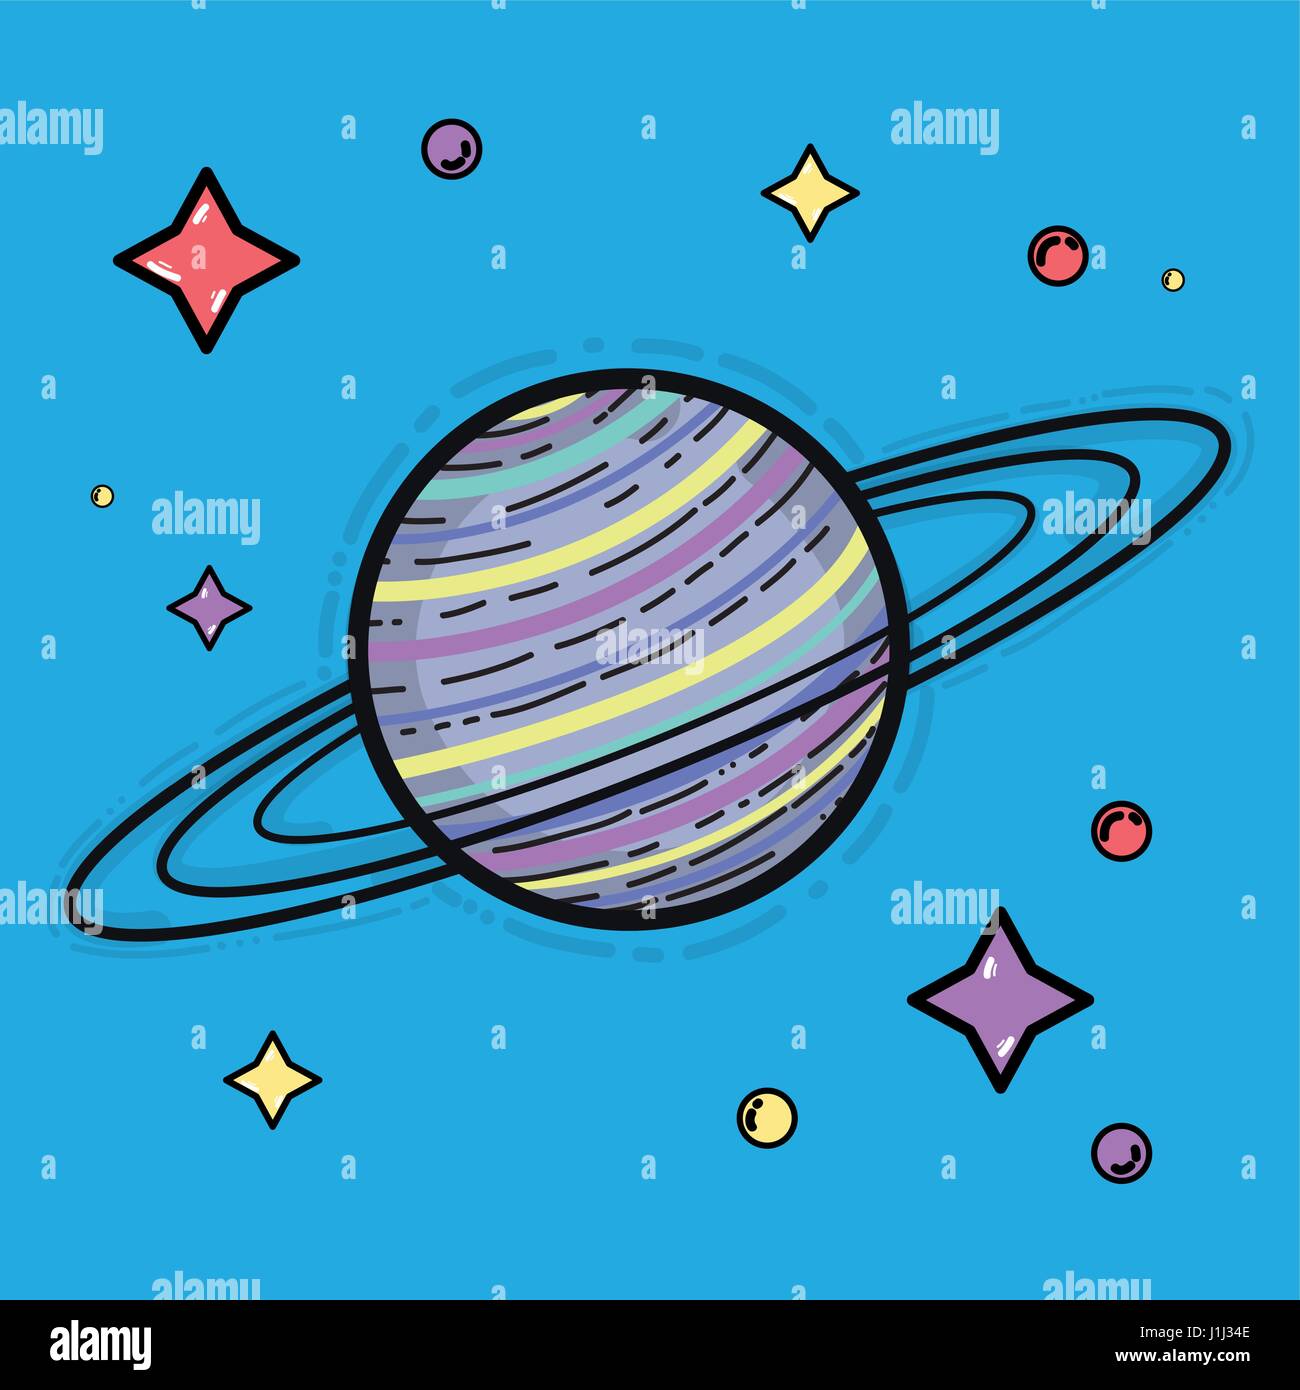 saturn planet in the space galaxy creation Stock Vector